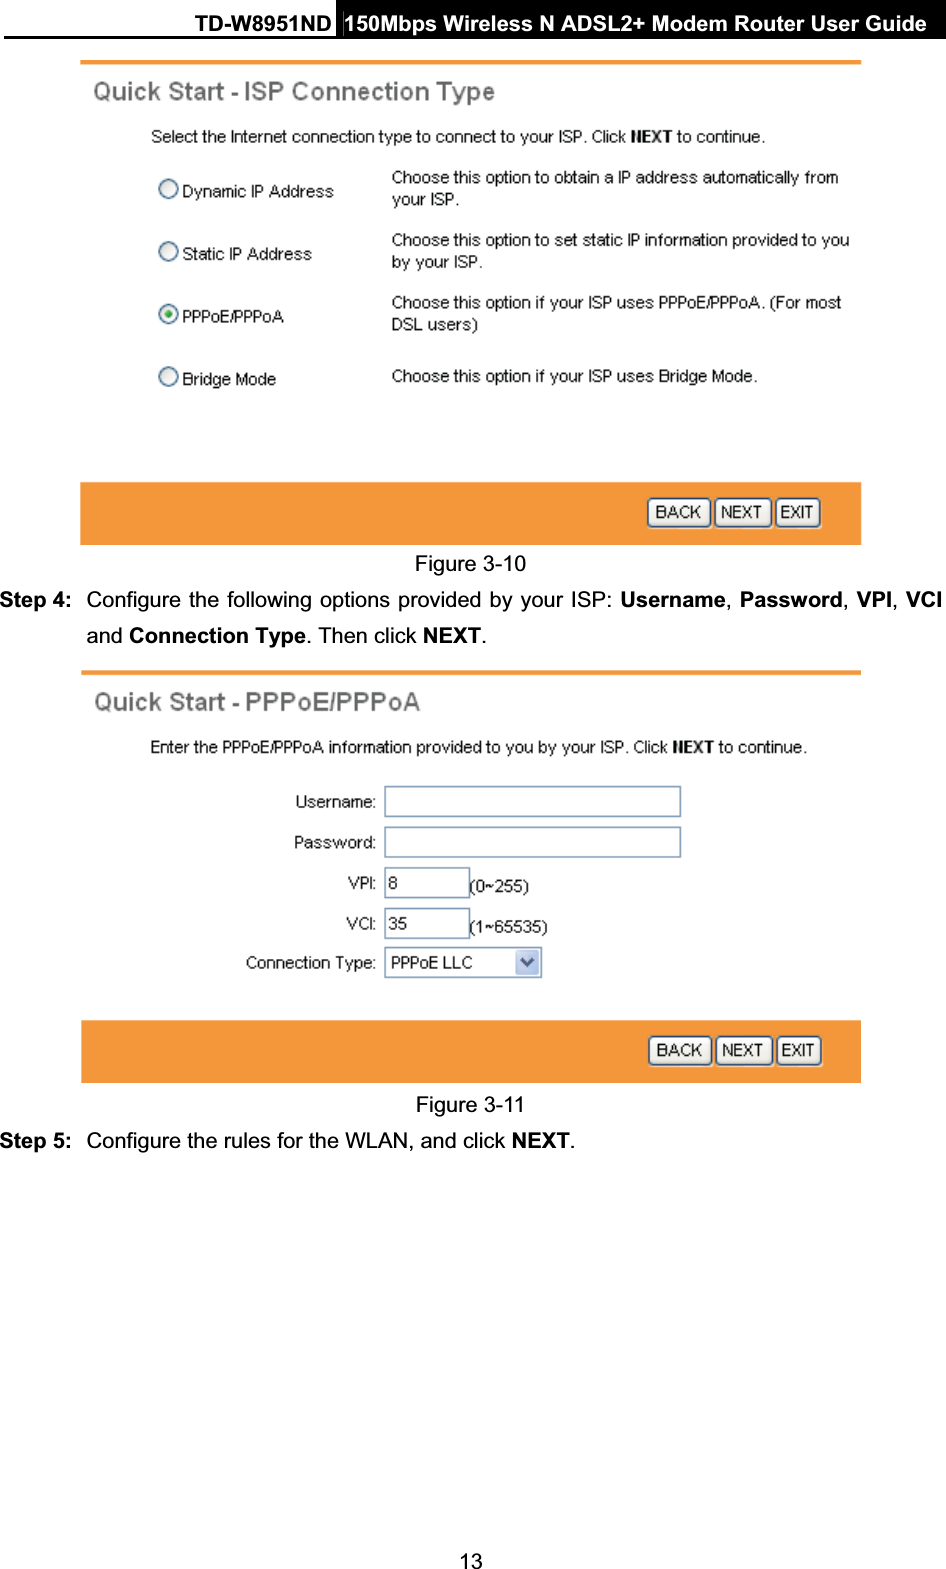 TD-W8951ND  150Mbps Wireless N ADSL2+ Modem Router User Guide13Figure 3-10 Step 4:  Configure the following options provided by your ISP: Username,Password, VPI,VCIand Connection Type. Then click NEXT.Figure 3-11 Step 5:  Configure the rules for the WLAN, and click NEXT.